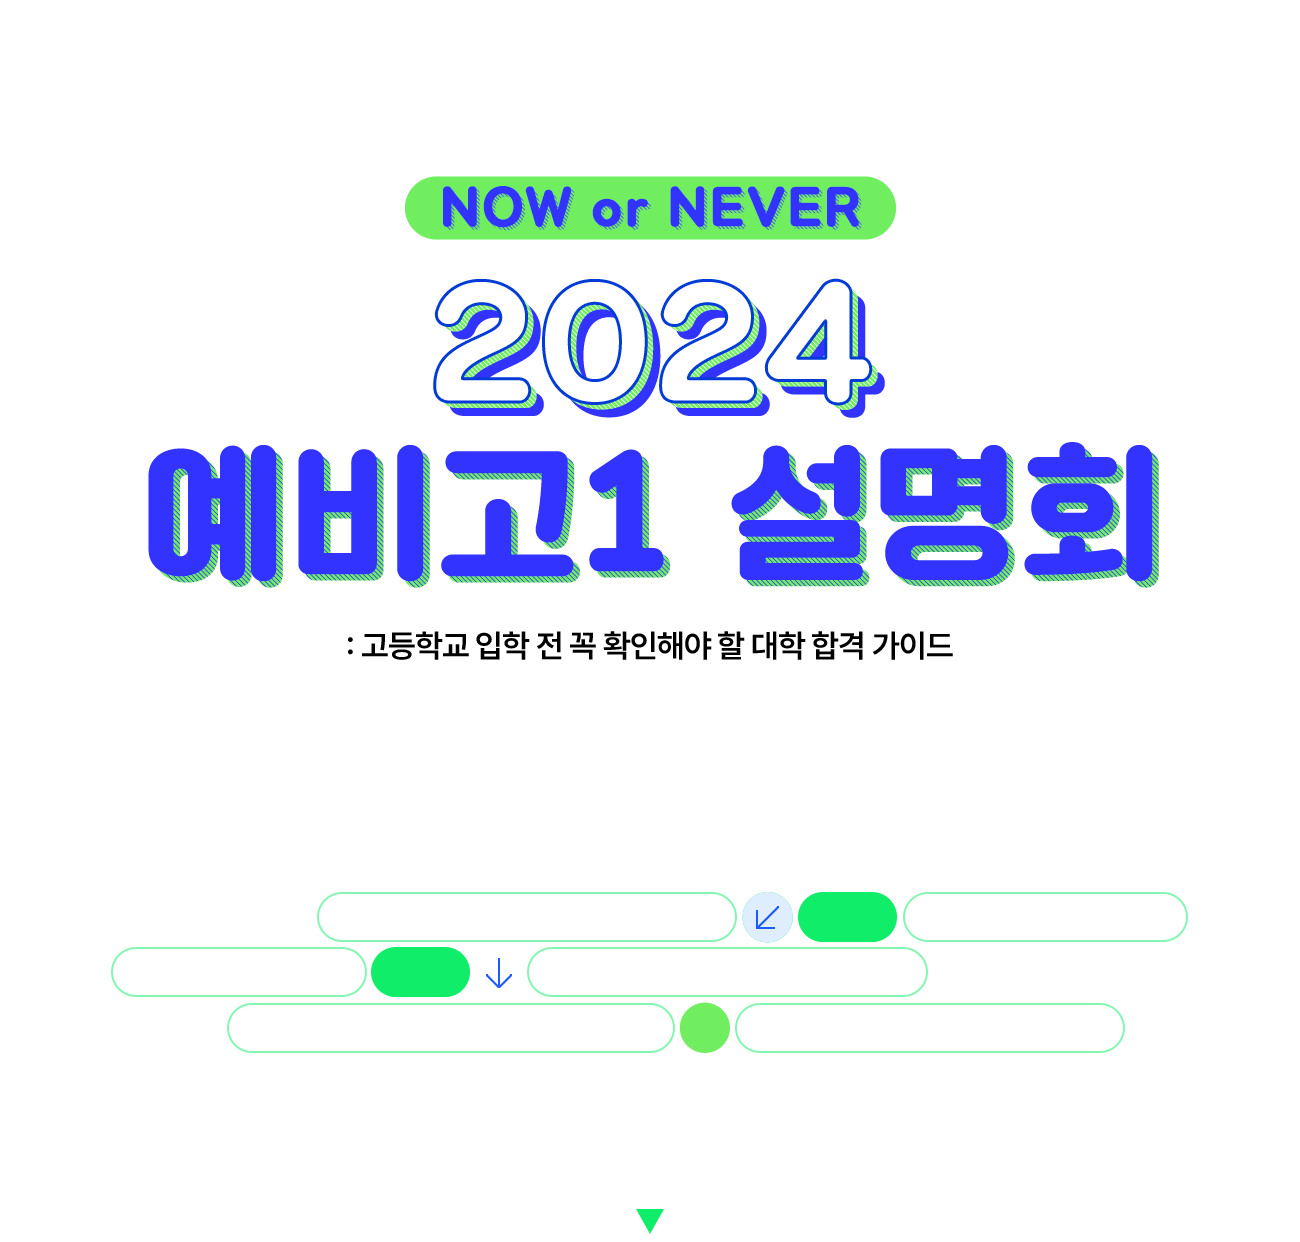 NOW or NEVER 2024 예비고1 설명회